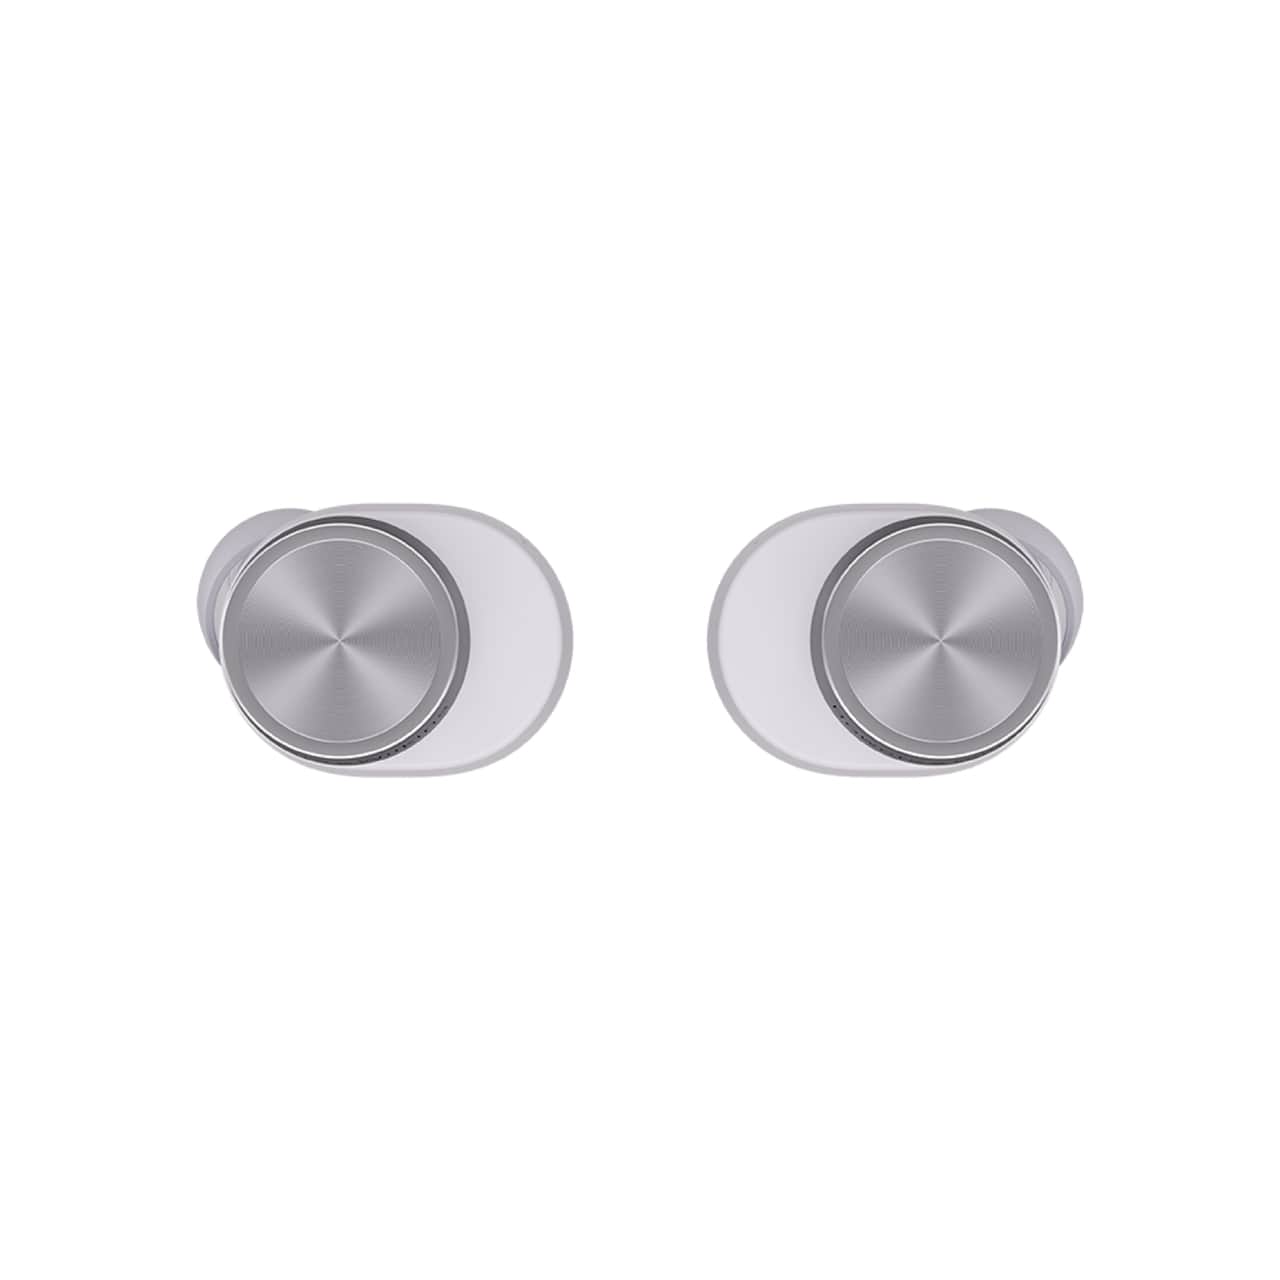 Bowers Wilkins Pi5 S2 Spring Lilac